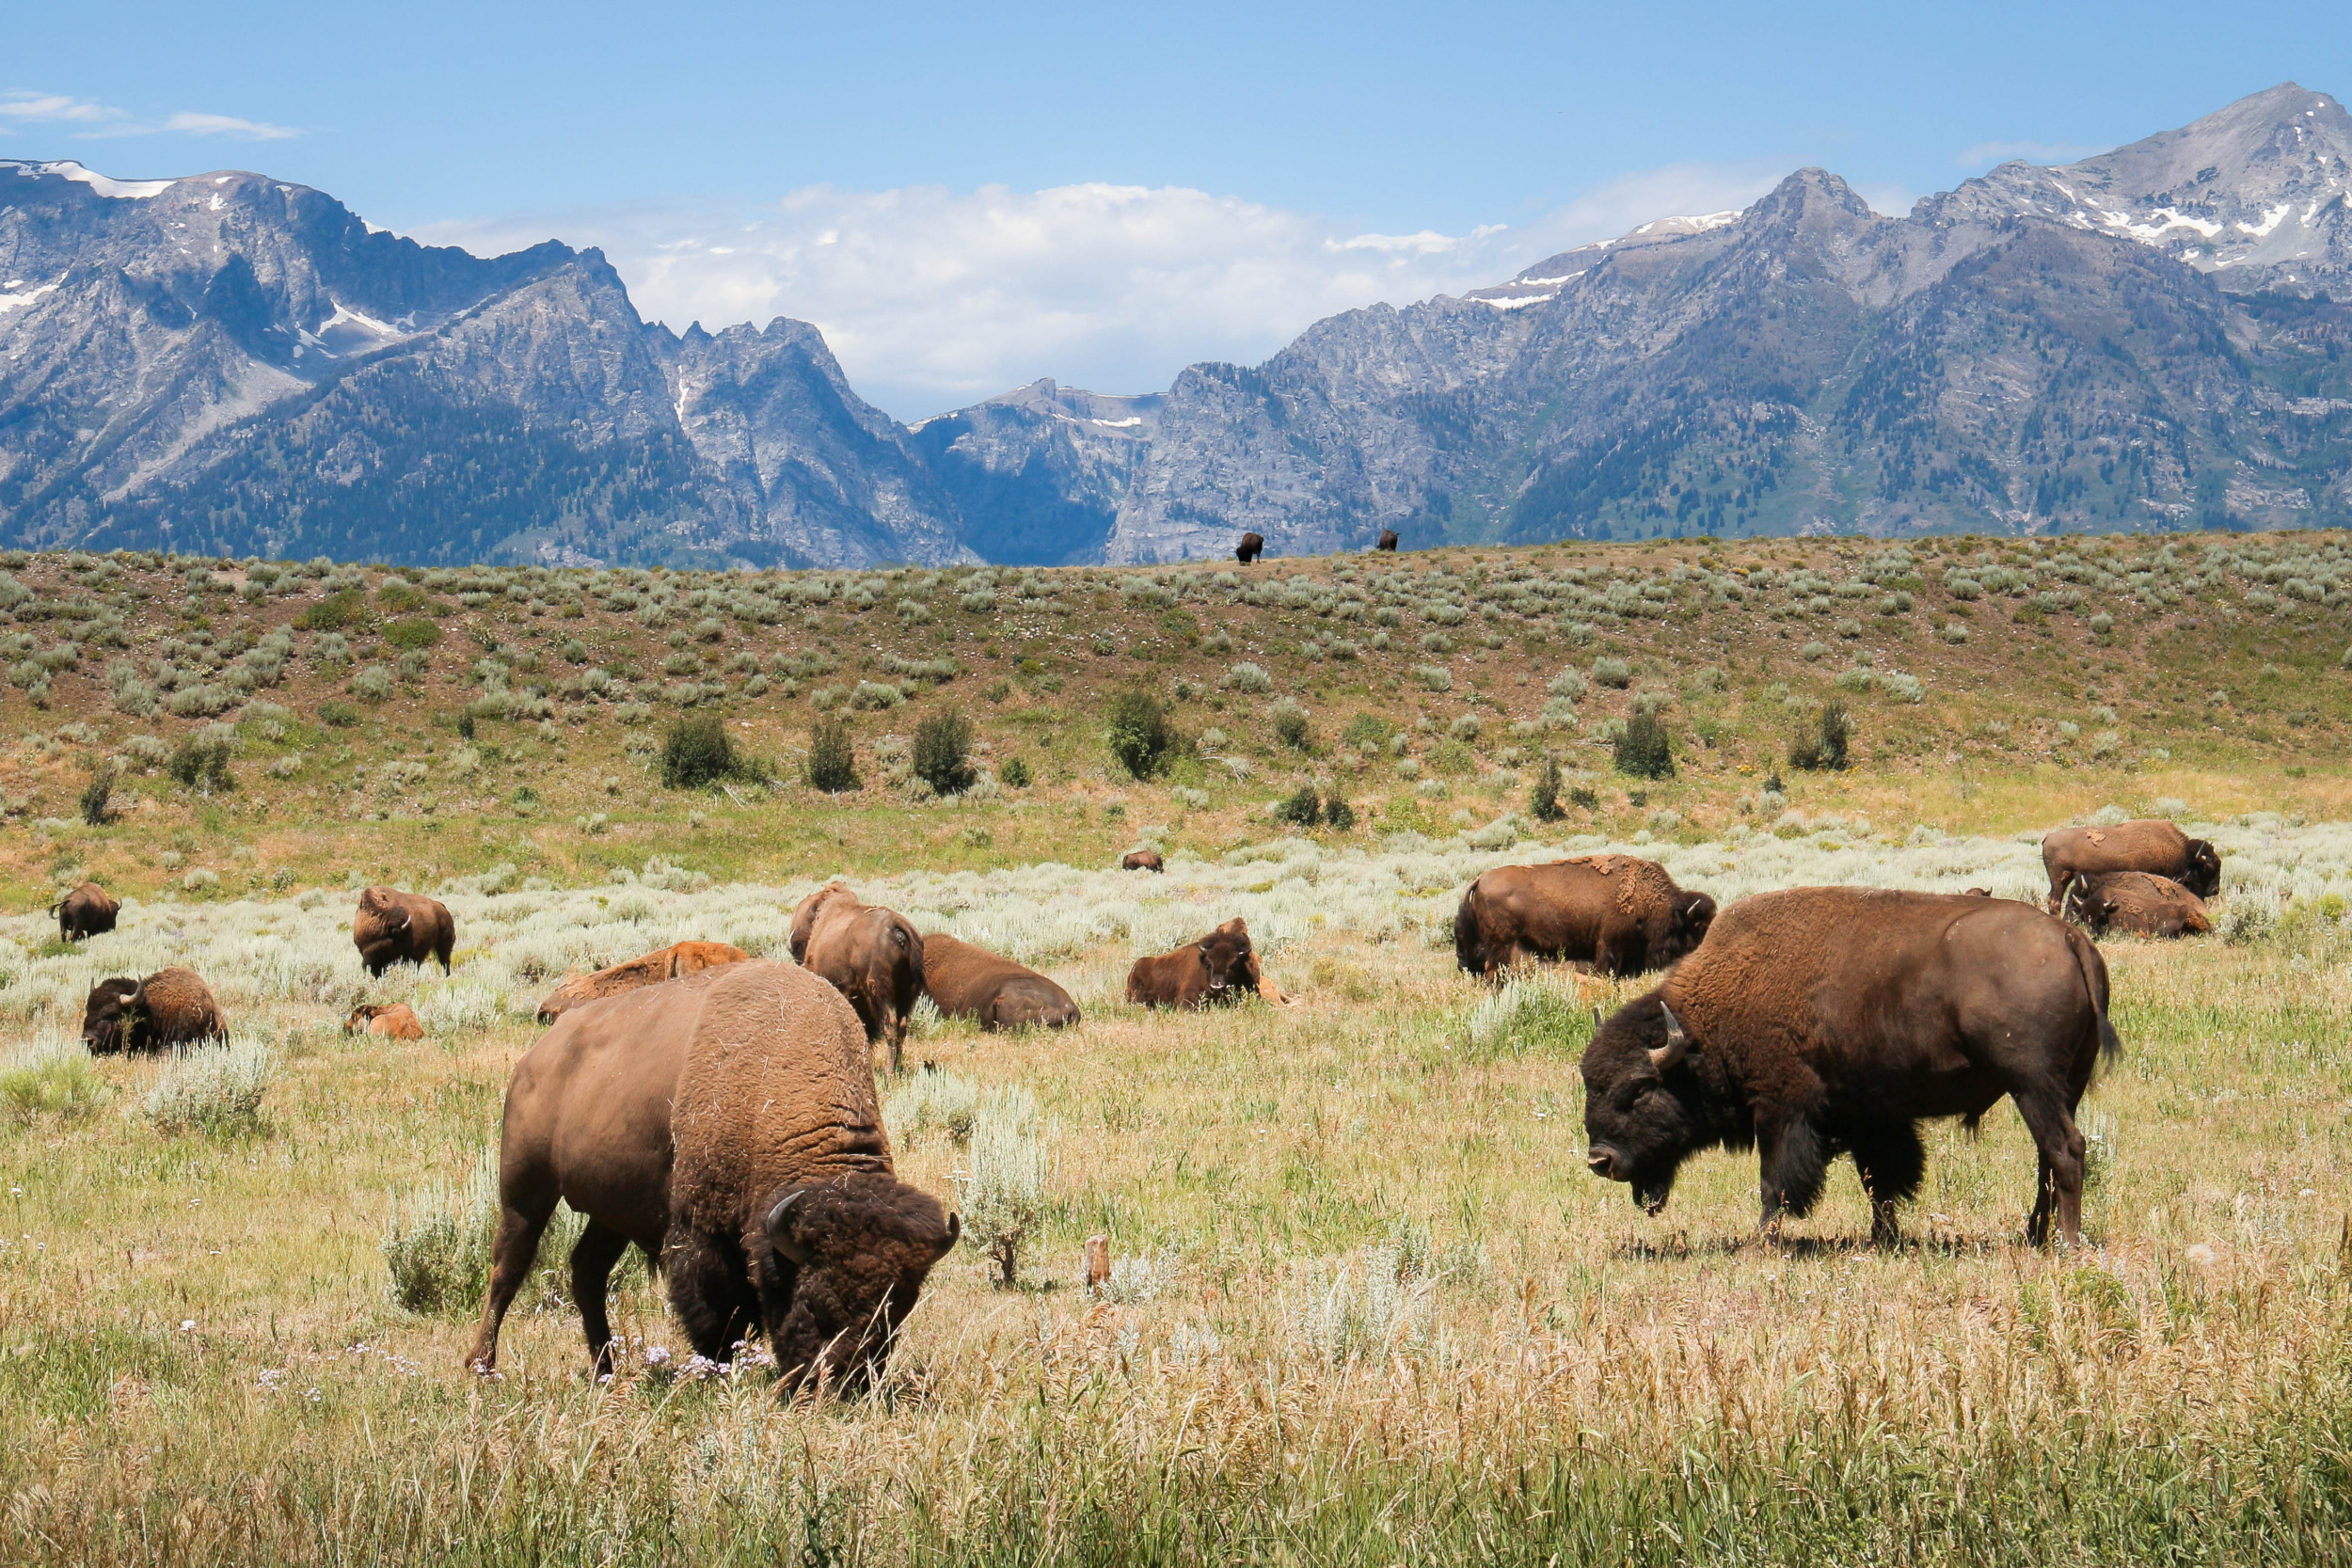 Wyoming social studies: Herd of brown bison graze in grassy field with mountains in the background